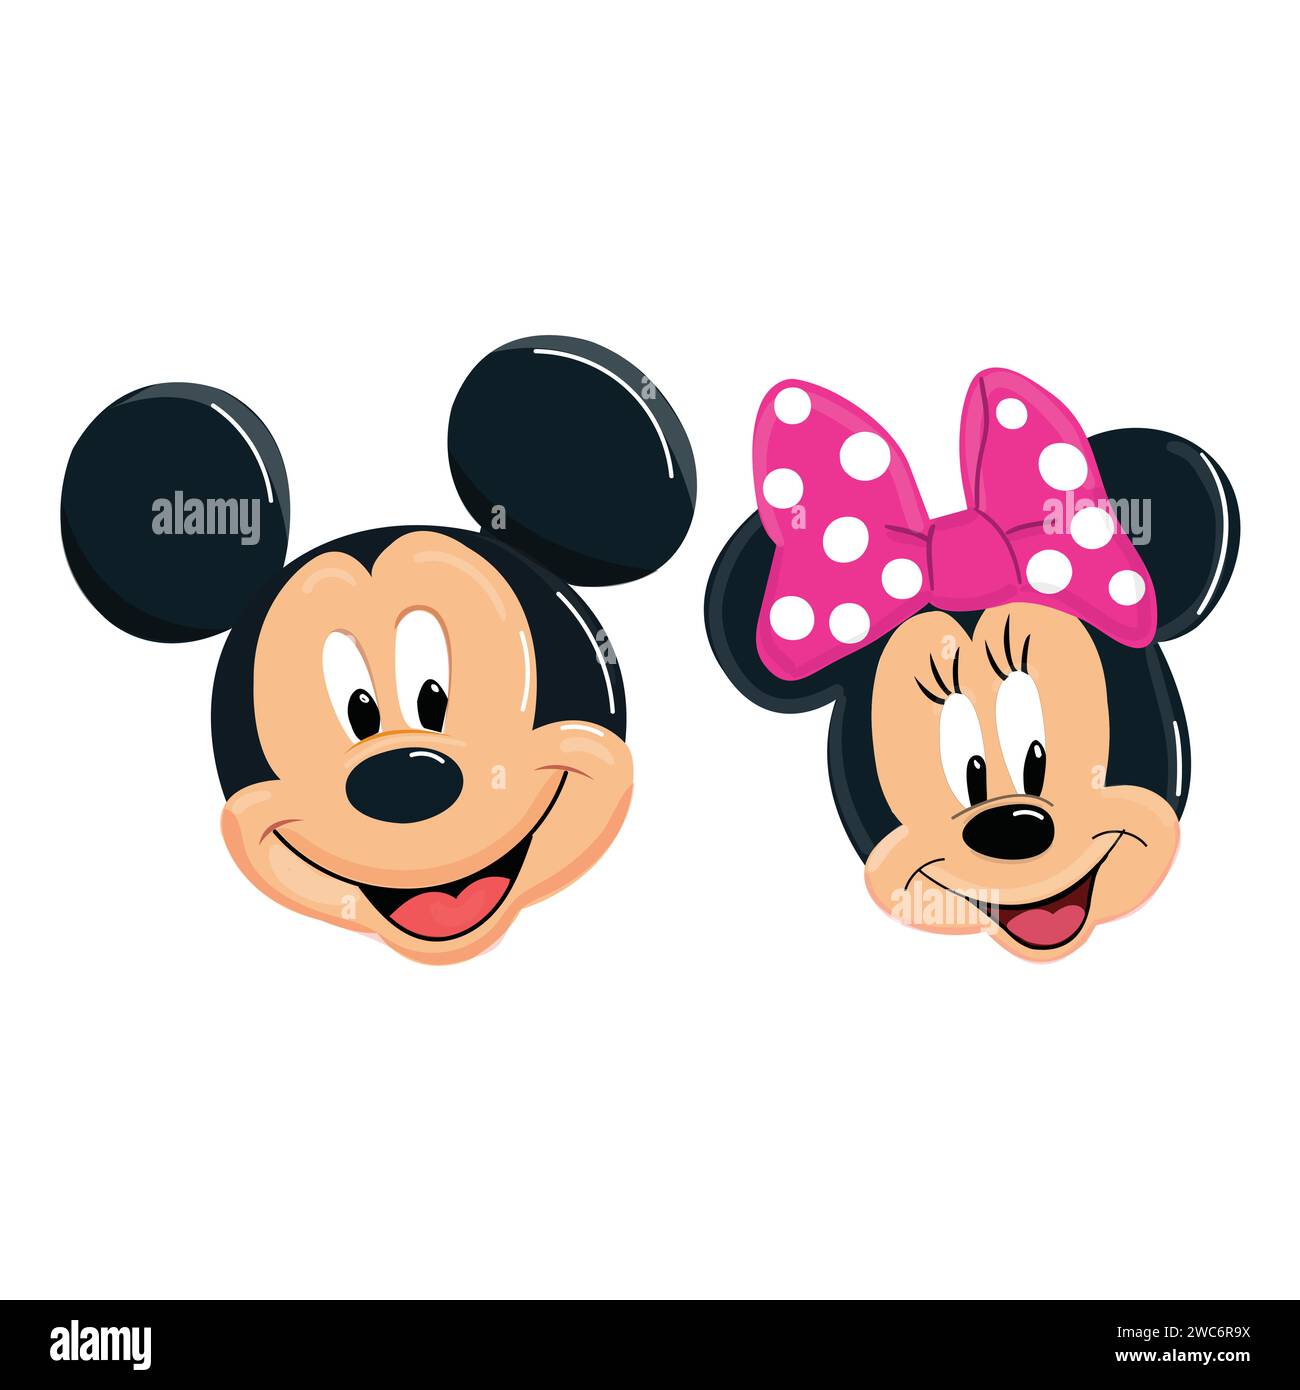 Minnie mouse Stock Photos, Royalty Free Minnie mouse Images